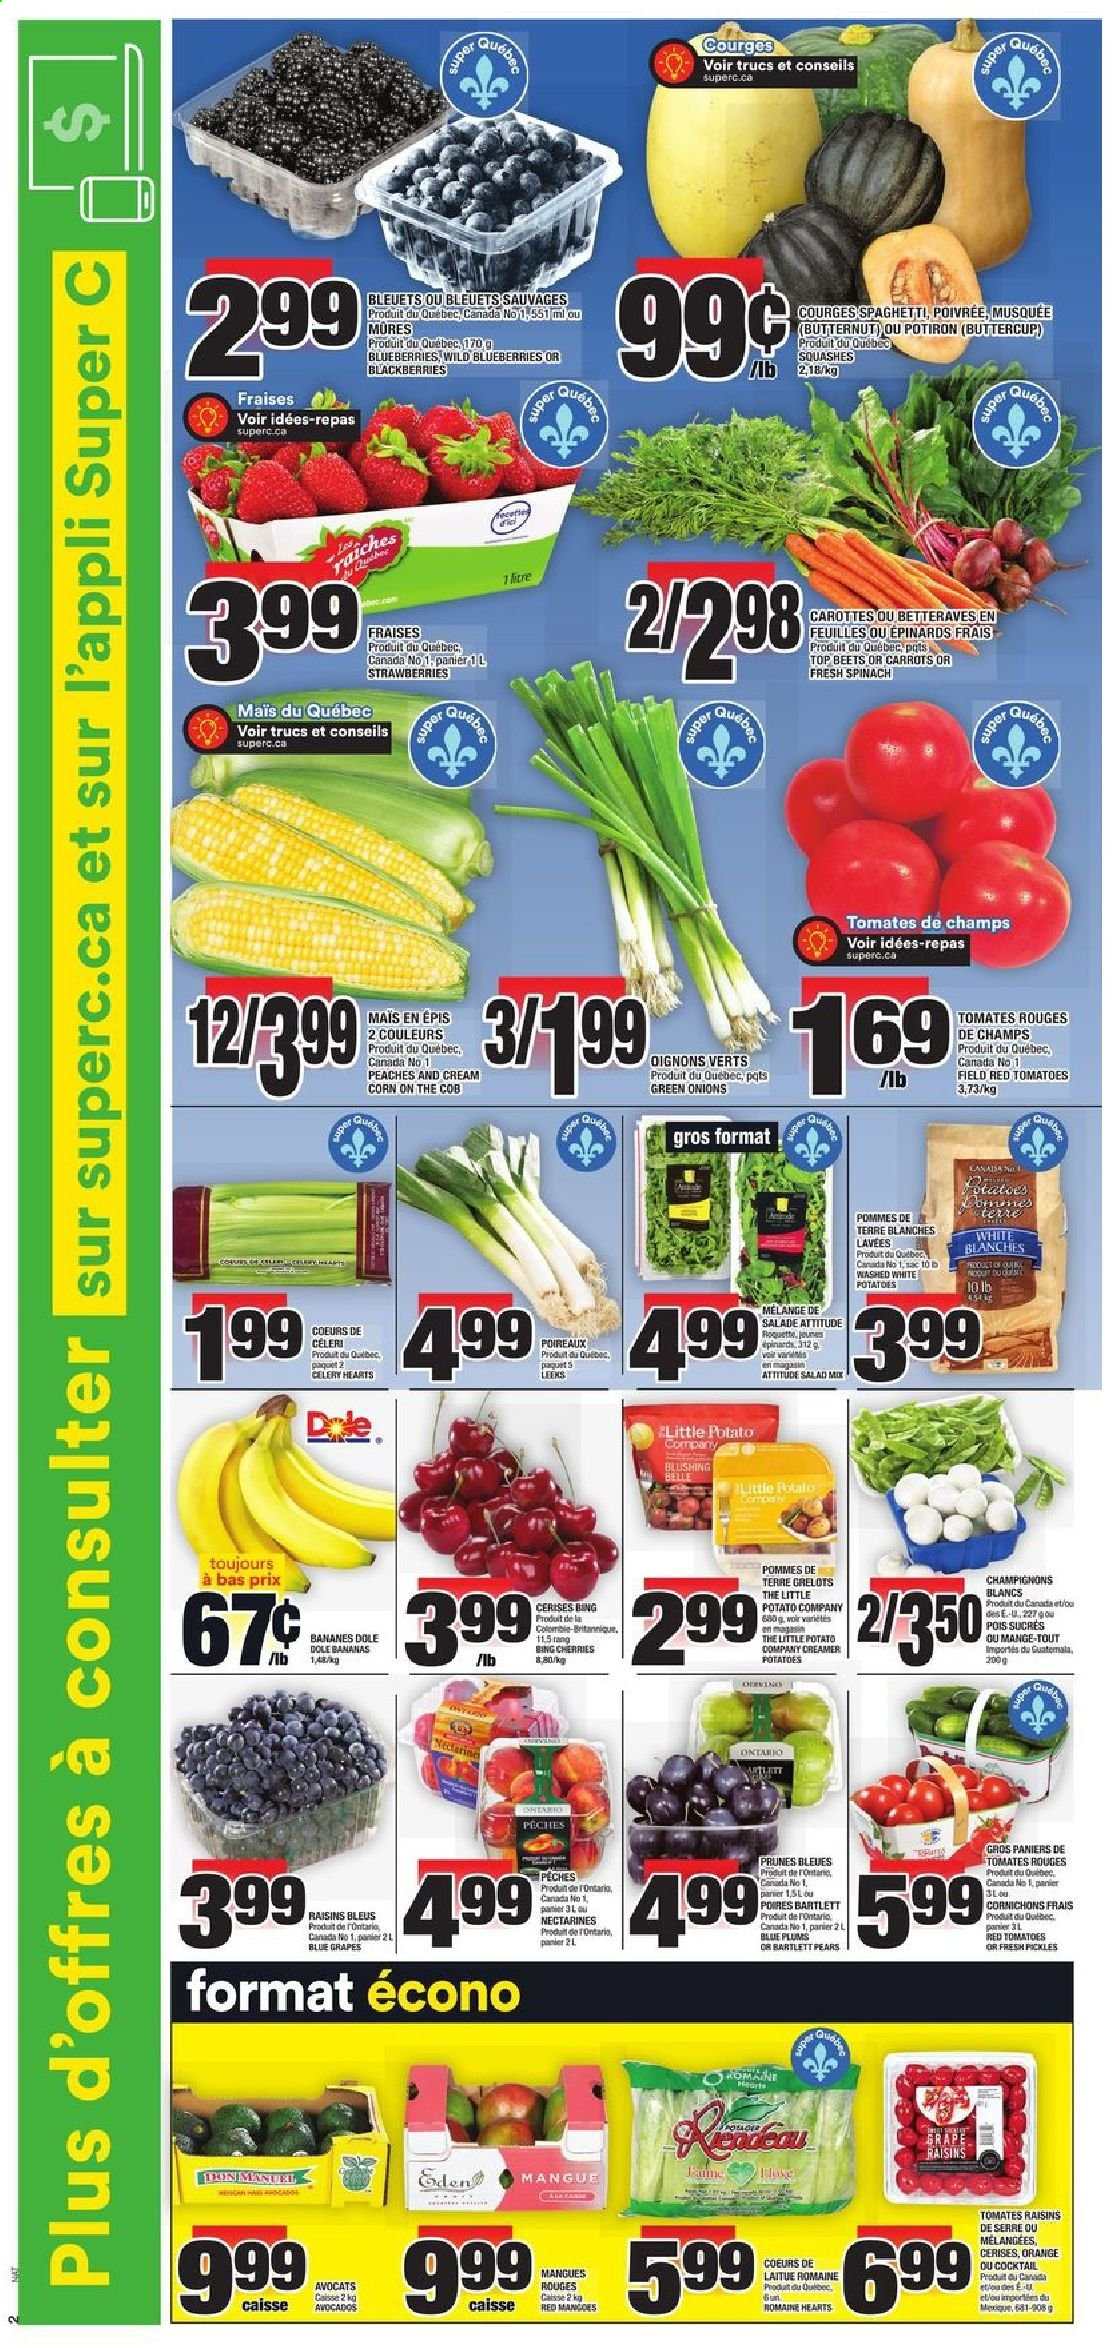 thumbnail - Super C Flyer - August 26, 2021 - September 01, 2021 - Sales products - butternut squash, carrots, celery, corn, spinach, tomatoes, potatoes, salad, Dole, green onion, sleeved celery, avocado, bananas, Bartlett pears, blackberries, blueberries, grapes, nectarines, strawberries, plums, cherries, pears, peaches, spaghetti, pickles, prunes, dried fruit, raisins. Page 3.